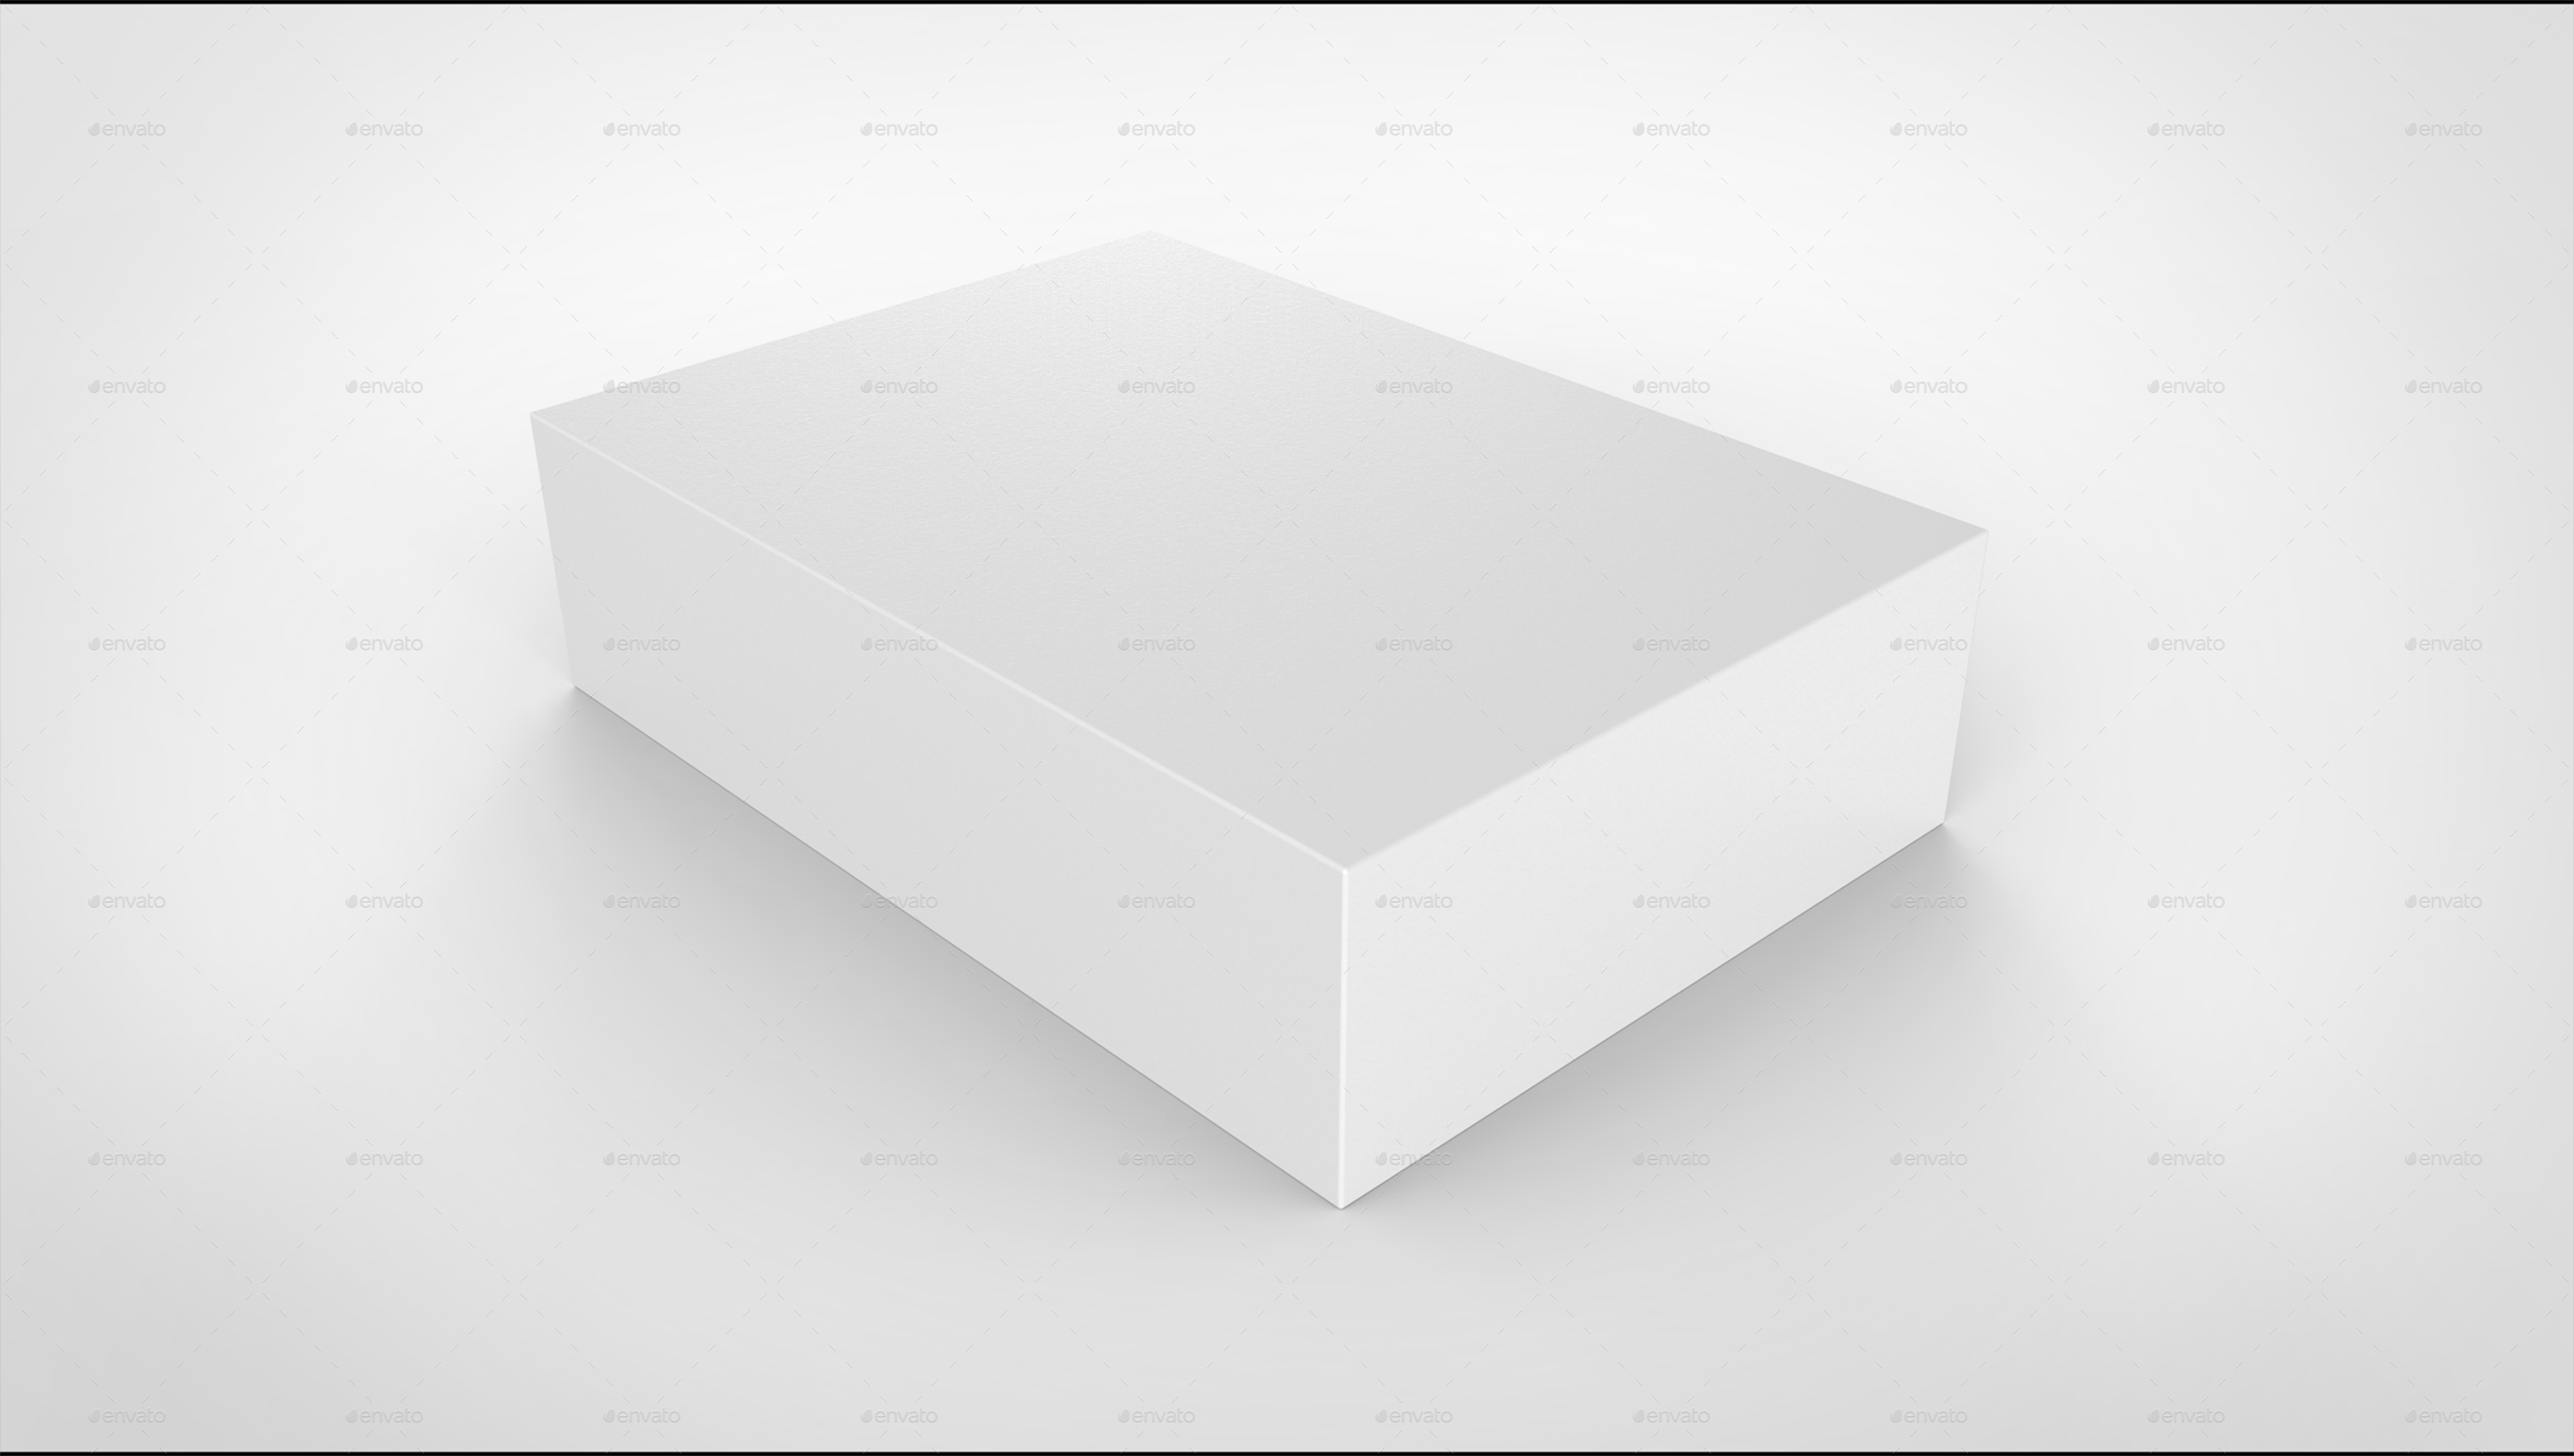 Download Free photo: 3D Boxes - 3d, Boxes, Cardboard - Free Download - Jooinn